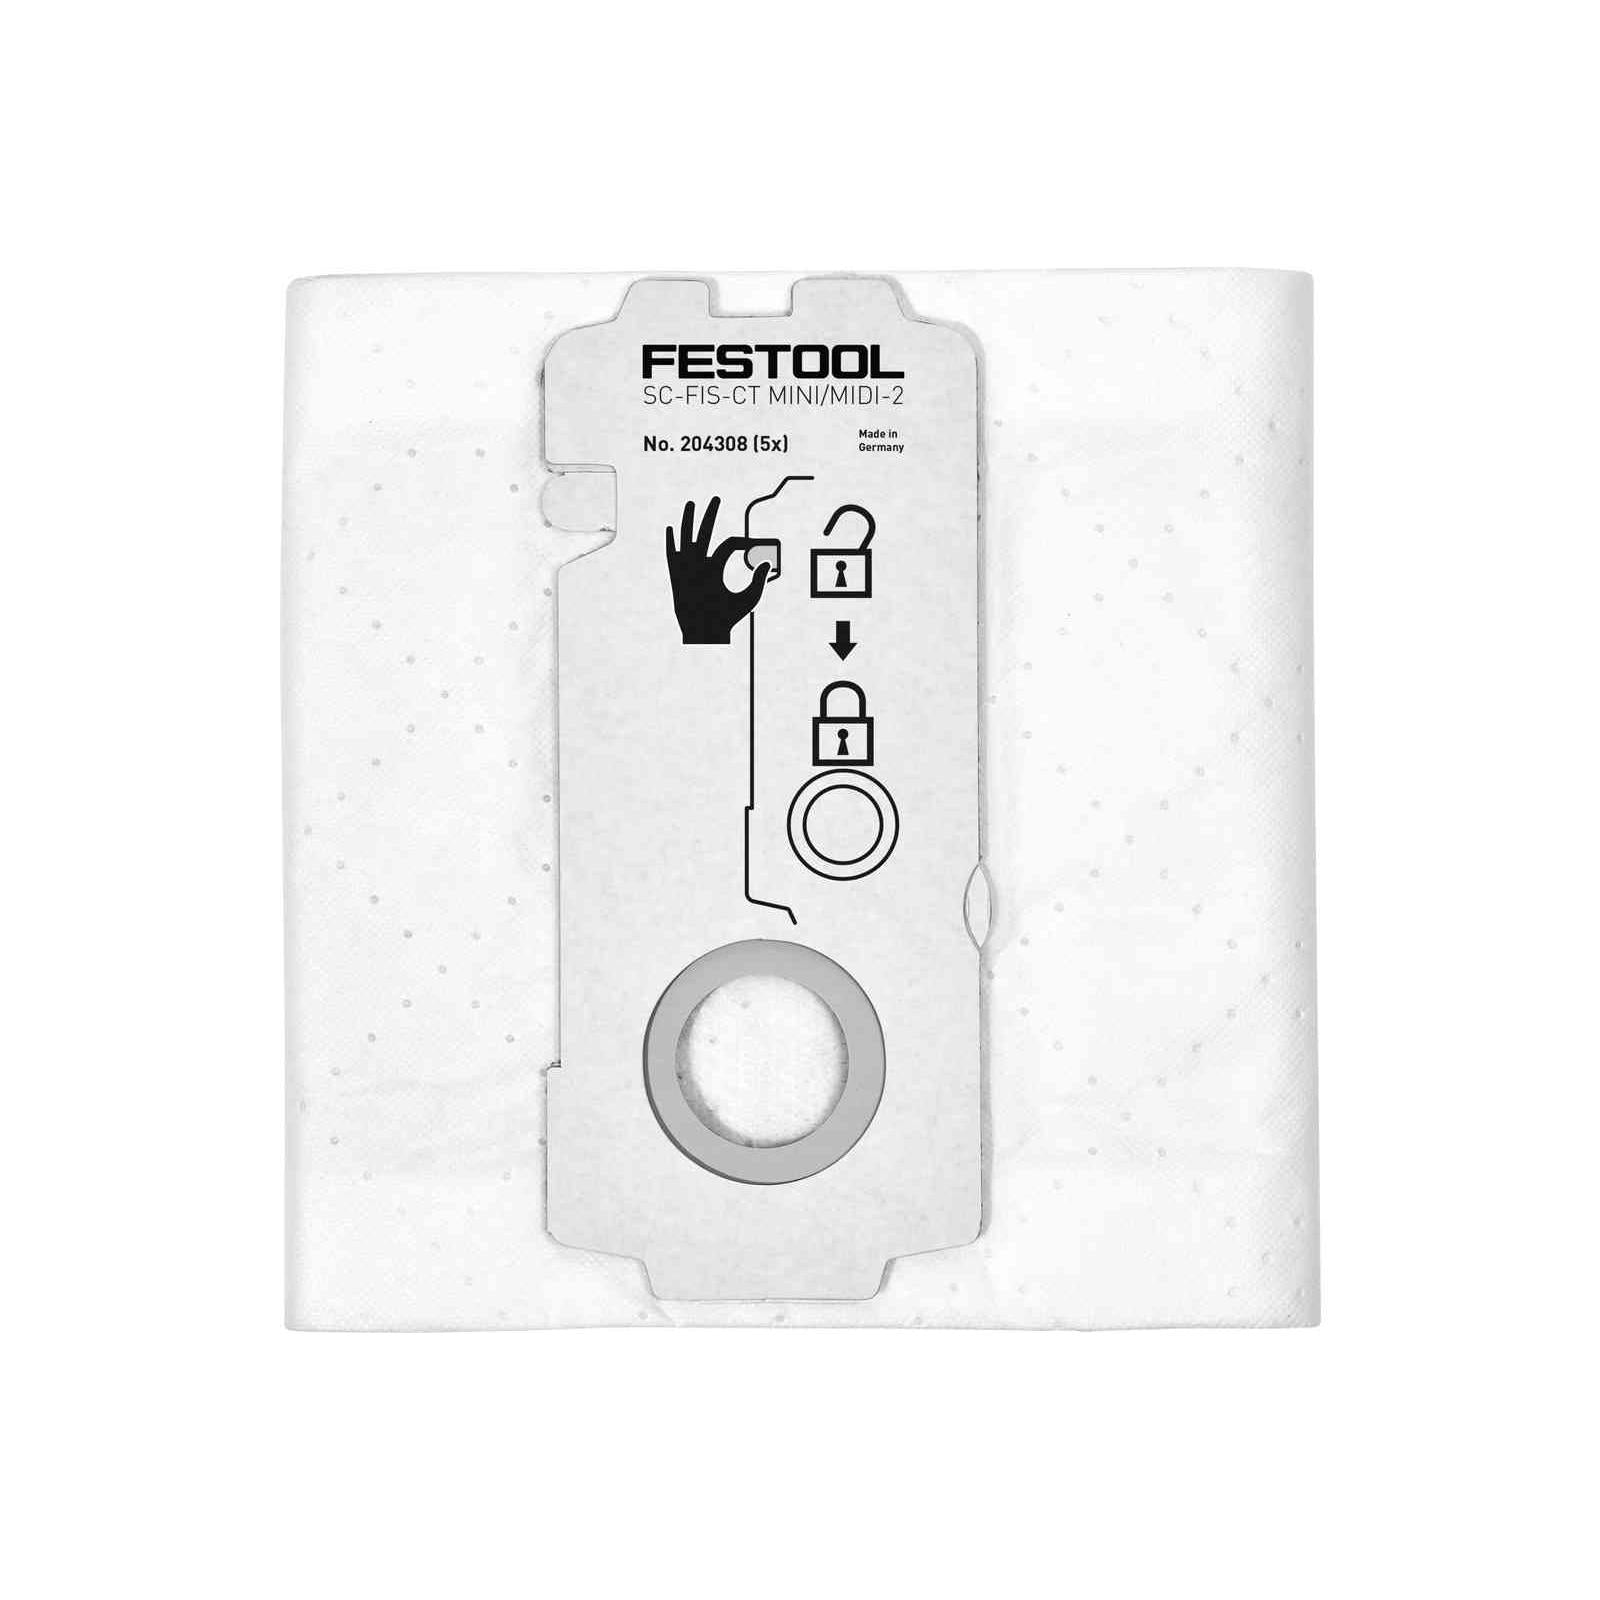 Festool Selfclean Filter Bag SC-FIS for CTL Midi 204308 Power Tool Services